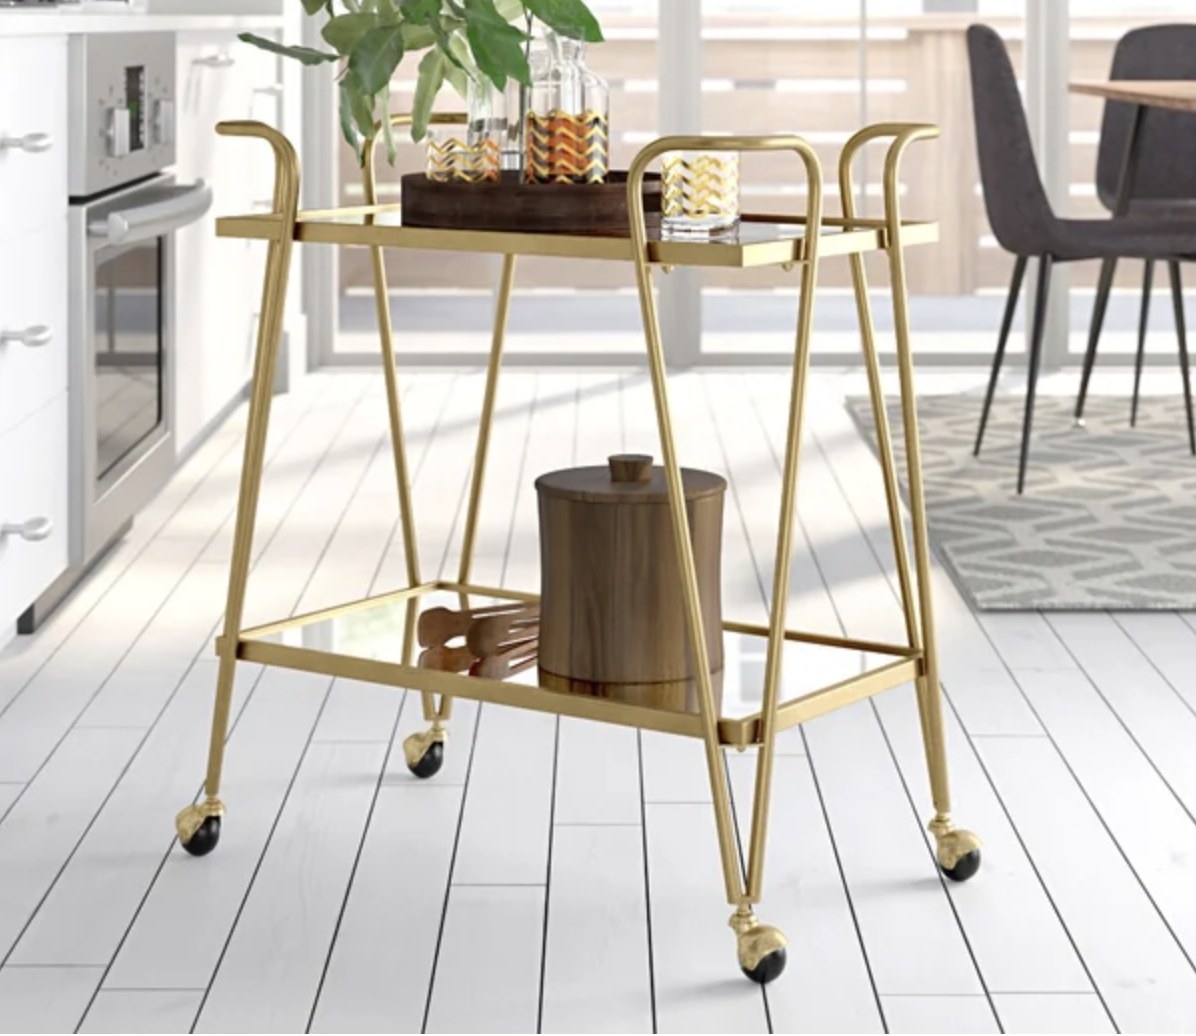 The gold bar cart has two levels and various drink ware supplies